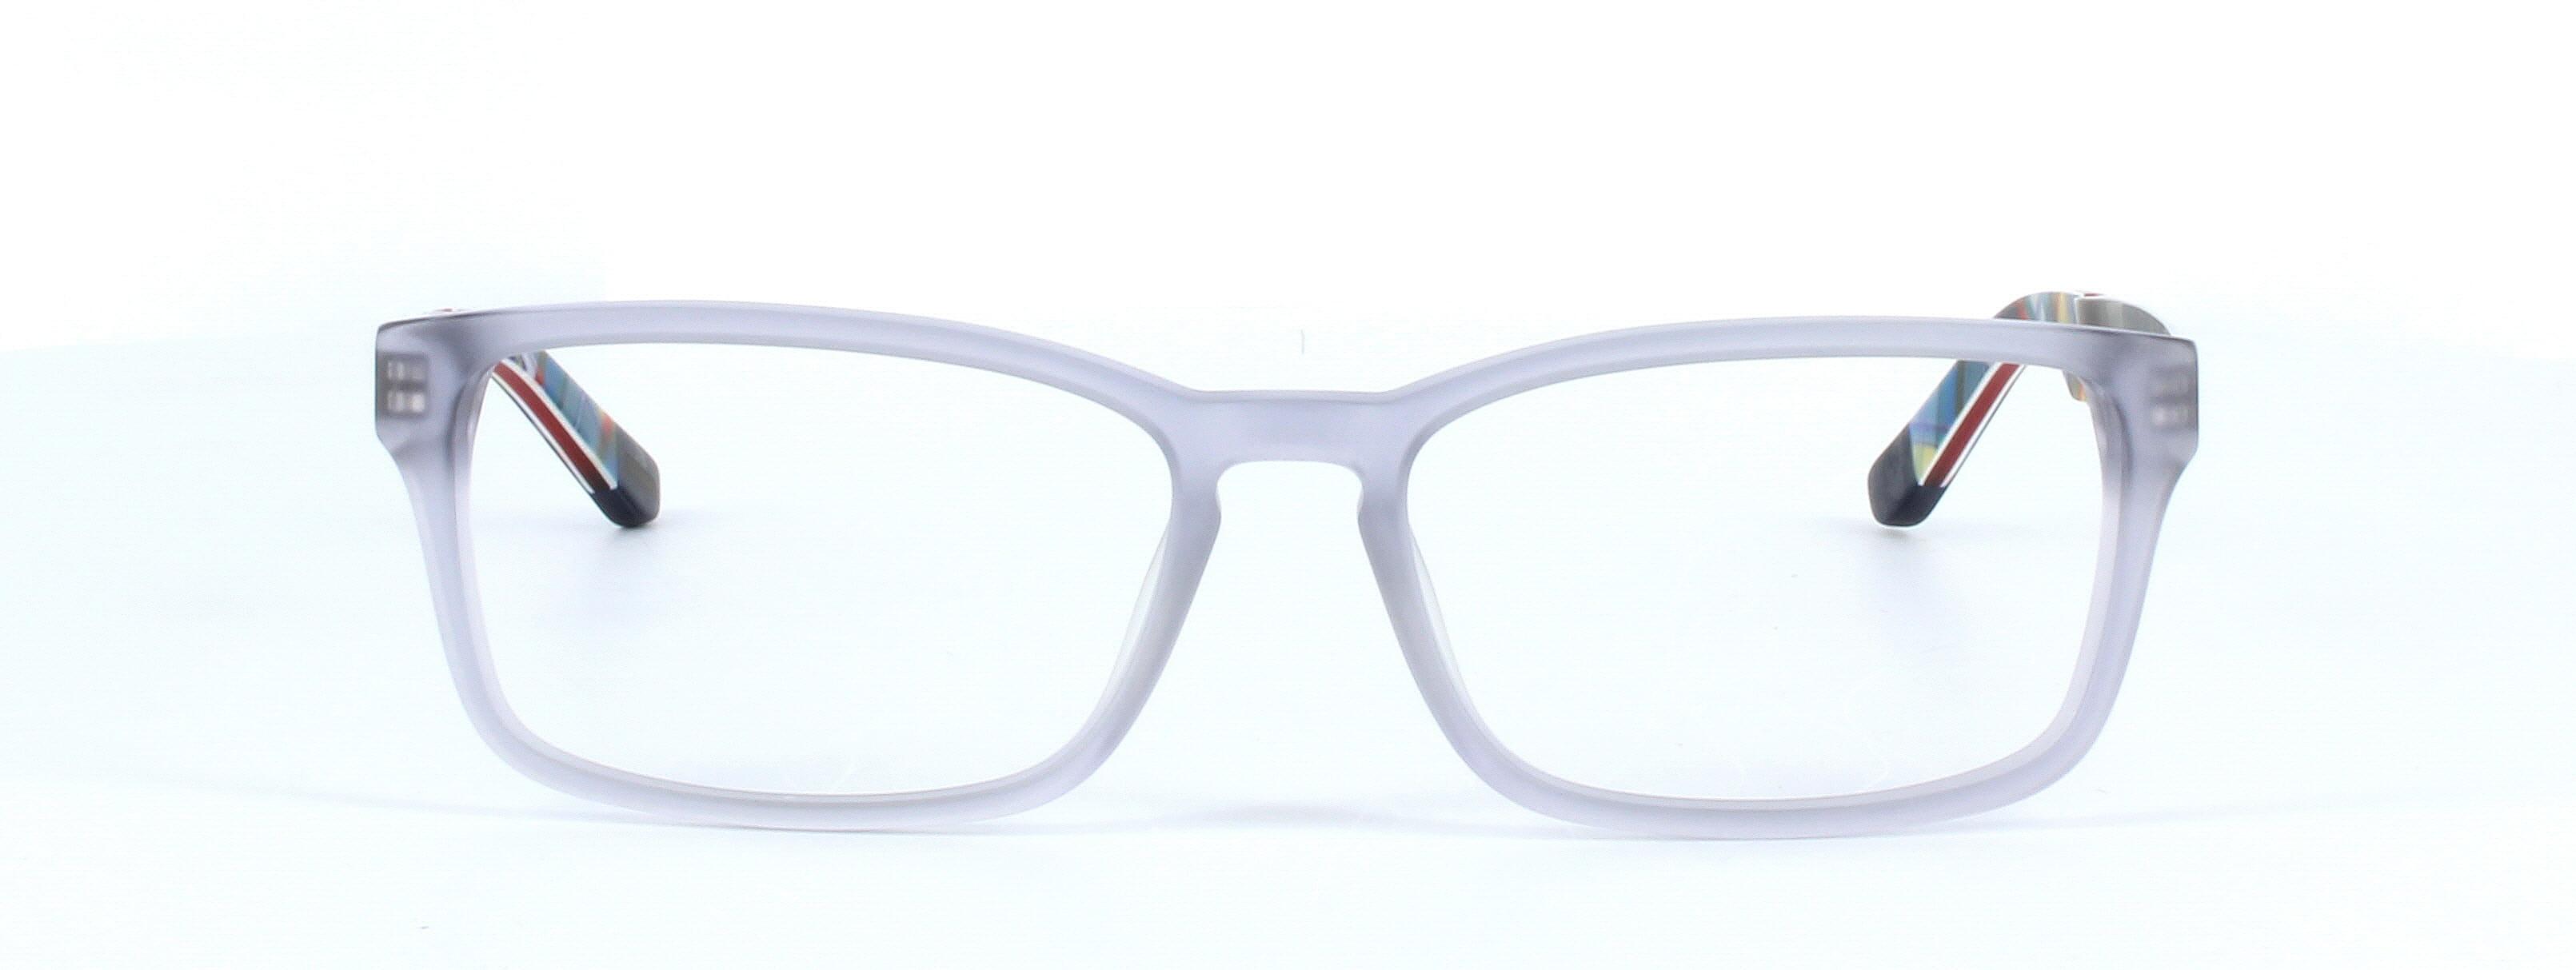 Gant 3060 020 - Unisex crystal grey acetate glasses with metal arms - image view 5